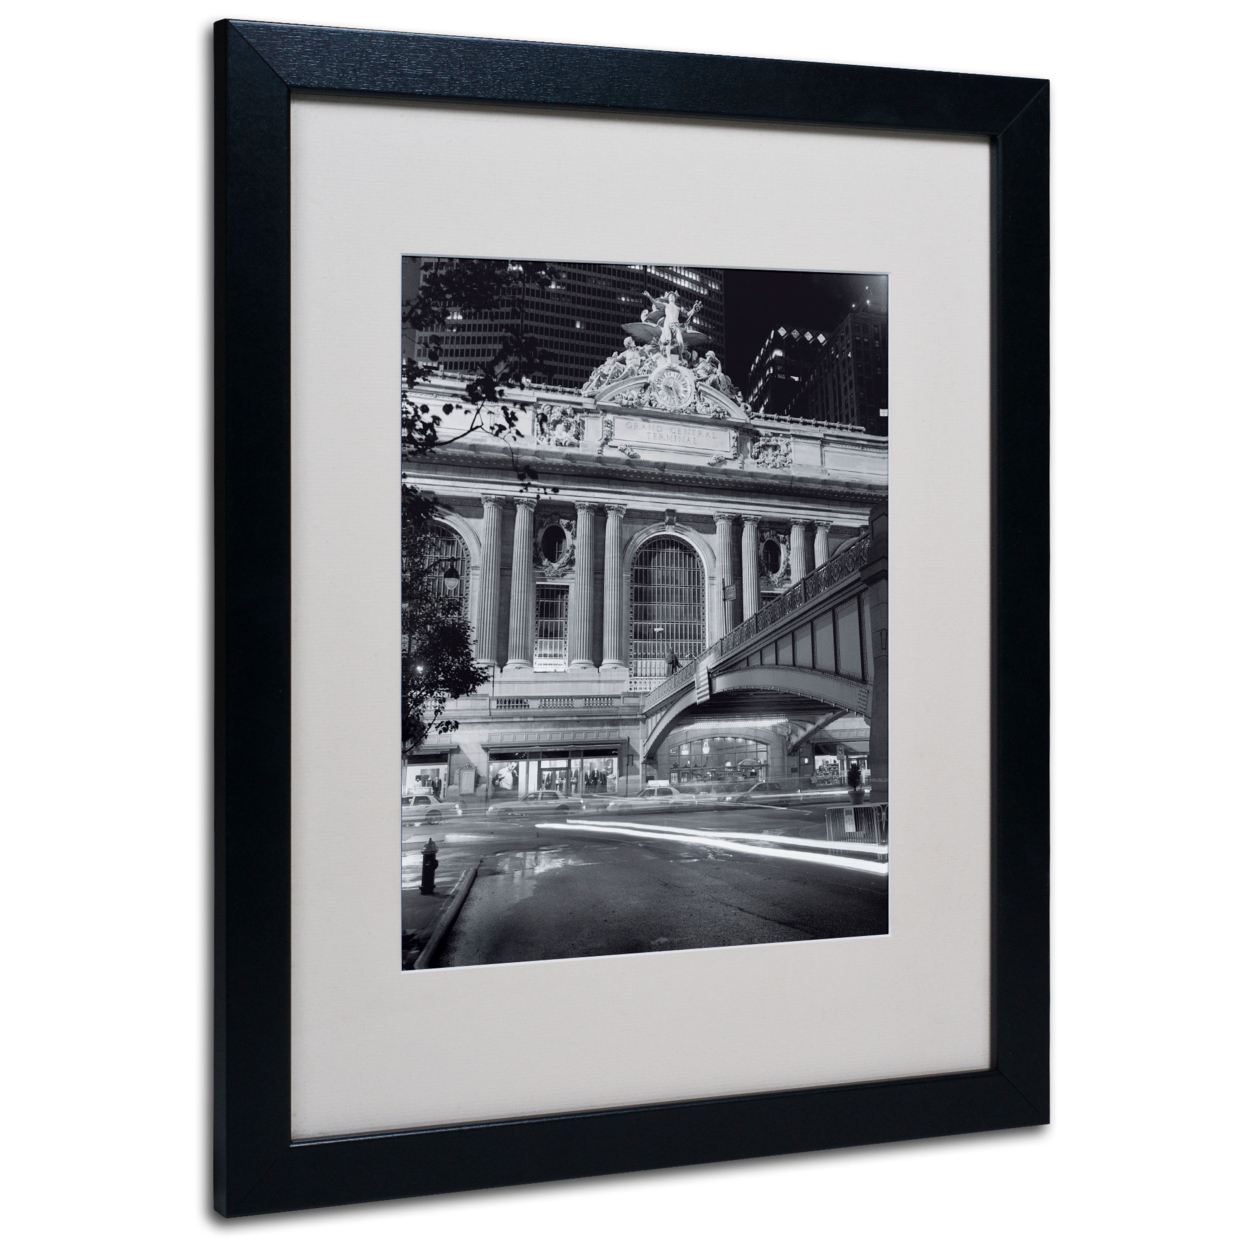 Chris Bliss 'Grand Central Night' Black Wooden Framed Art 18 X 22 Inches